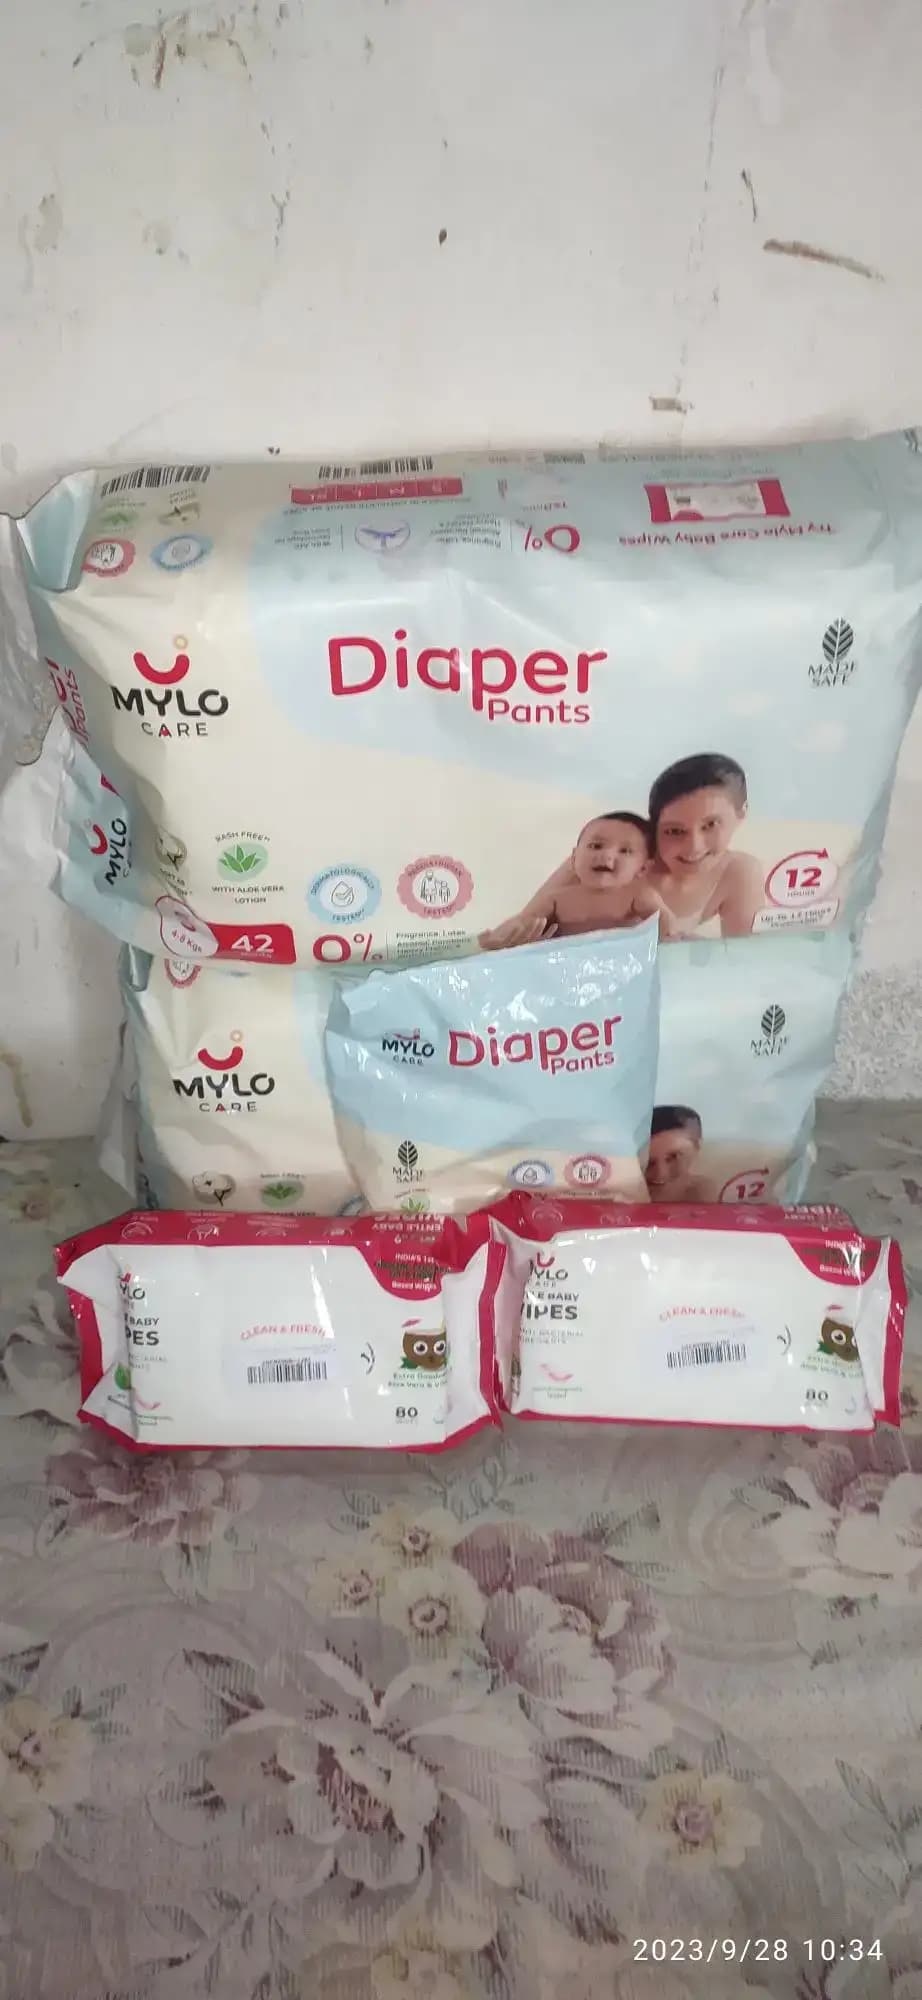 Monthly Diapering Super Saver Combo - Baby Diaper Pants Small (S) - (84 count) + Baby Wipes (Pack of 2)